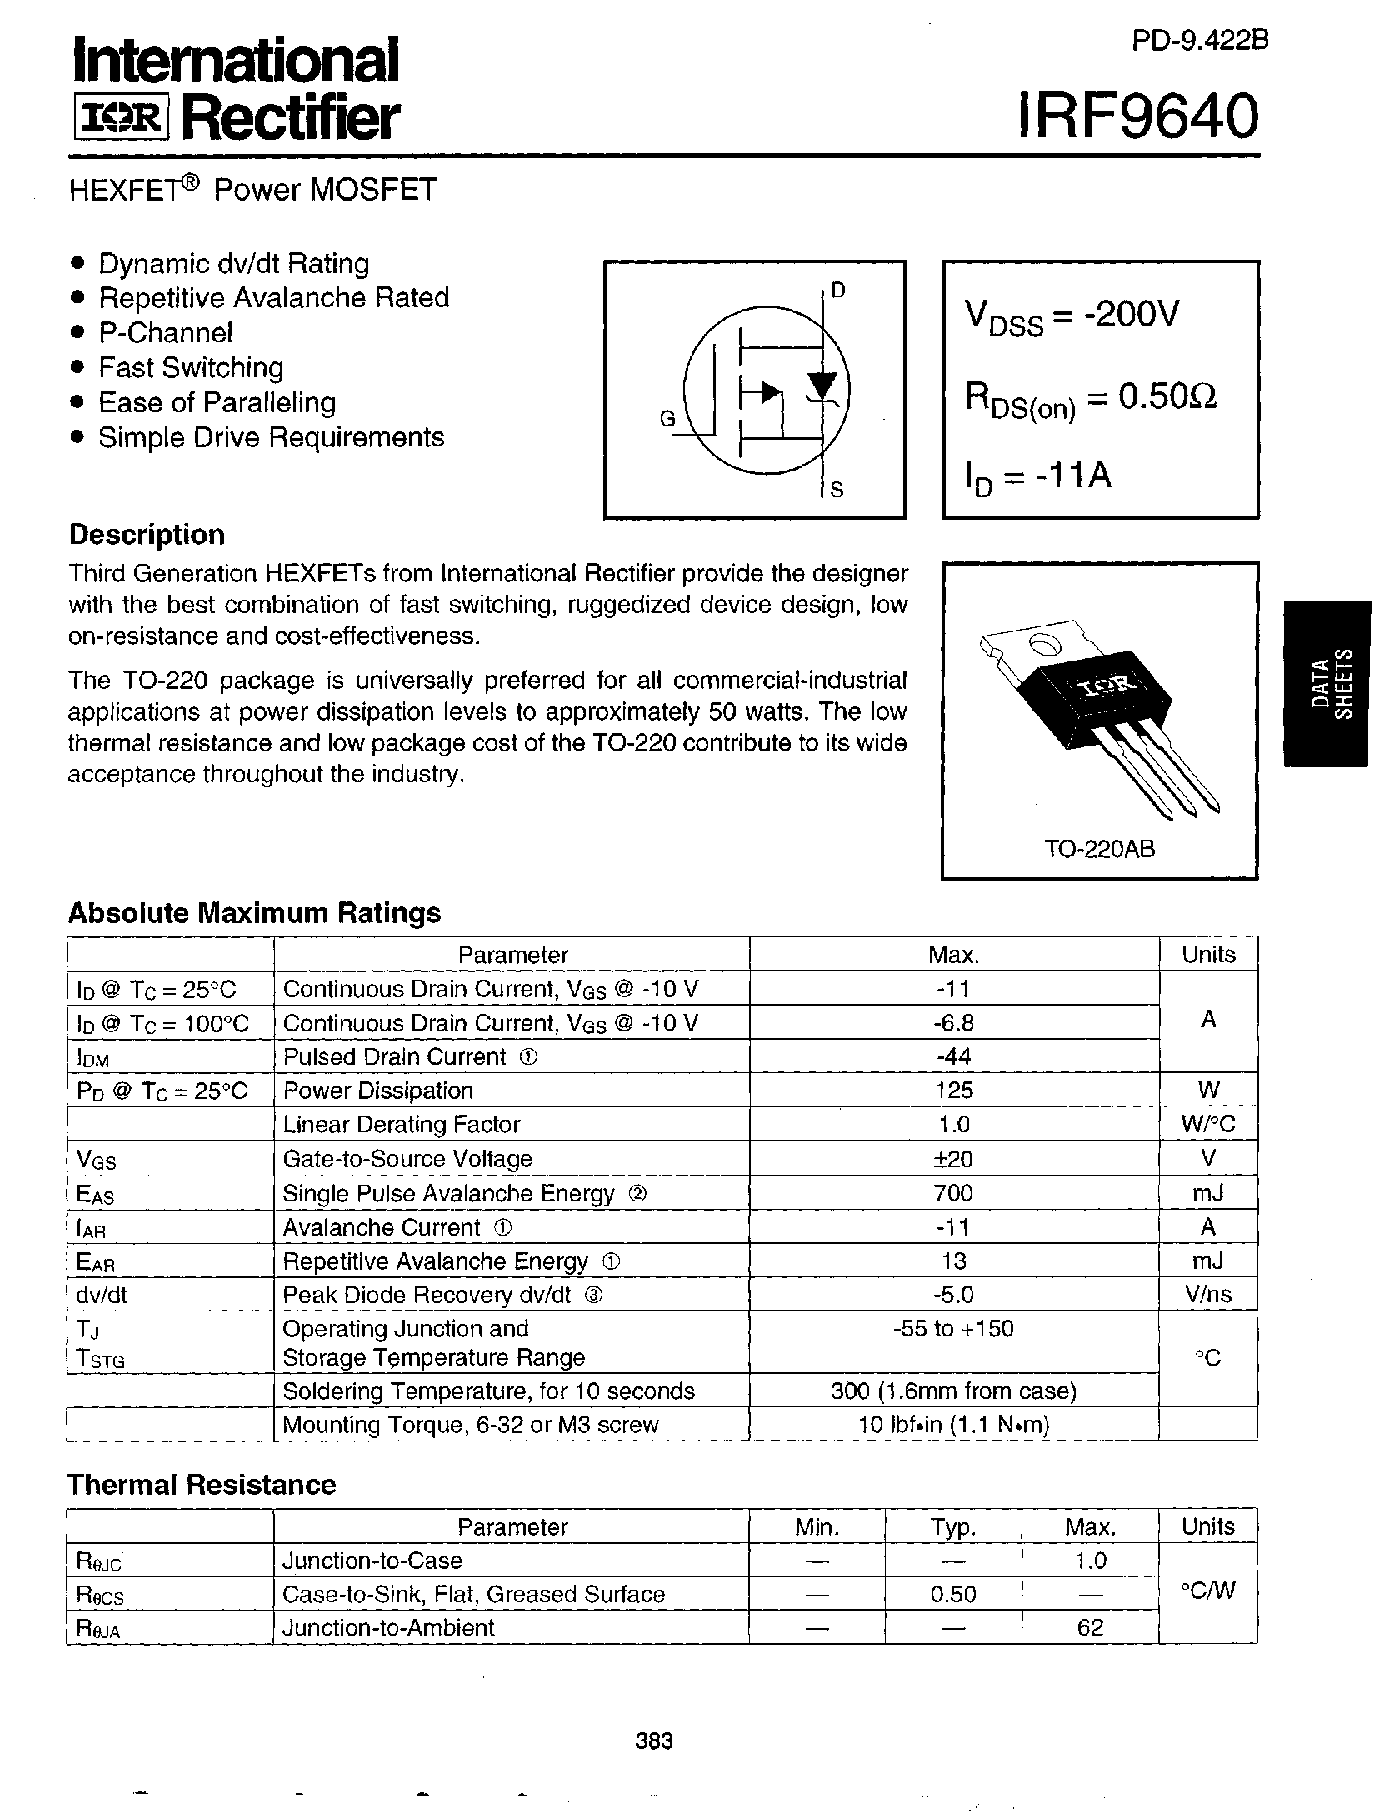 Datasheet IRF9640 - Power MOSFET(Vdss=-200V/ Rds(on)=0.50ohm/ Id=-11A) page 1